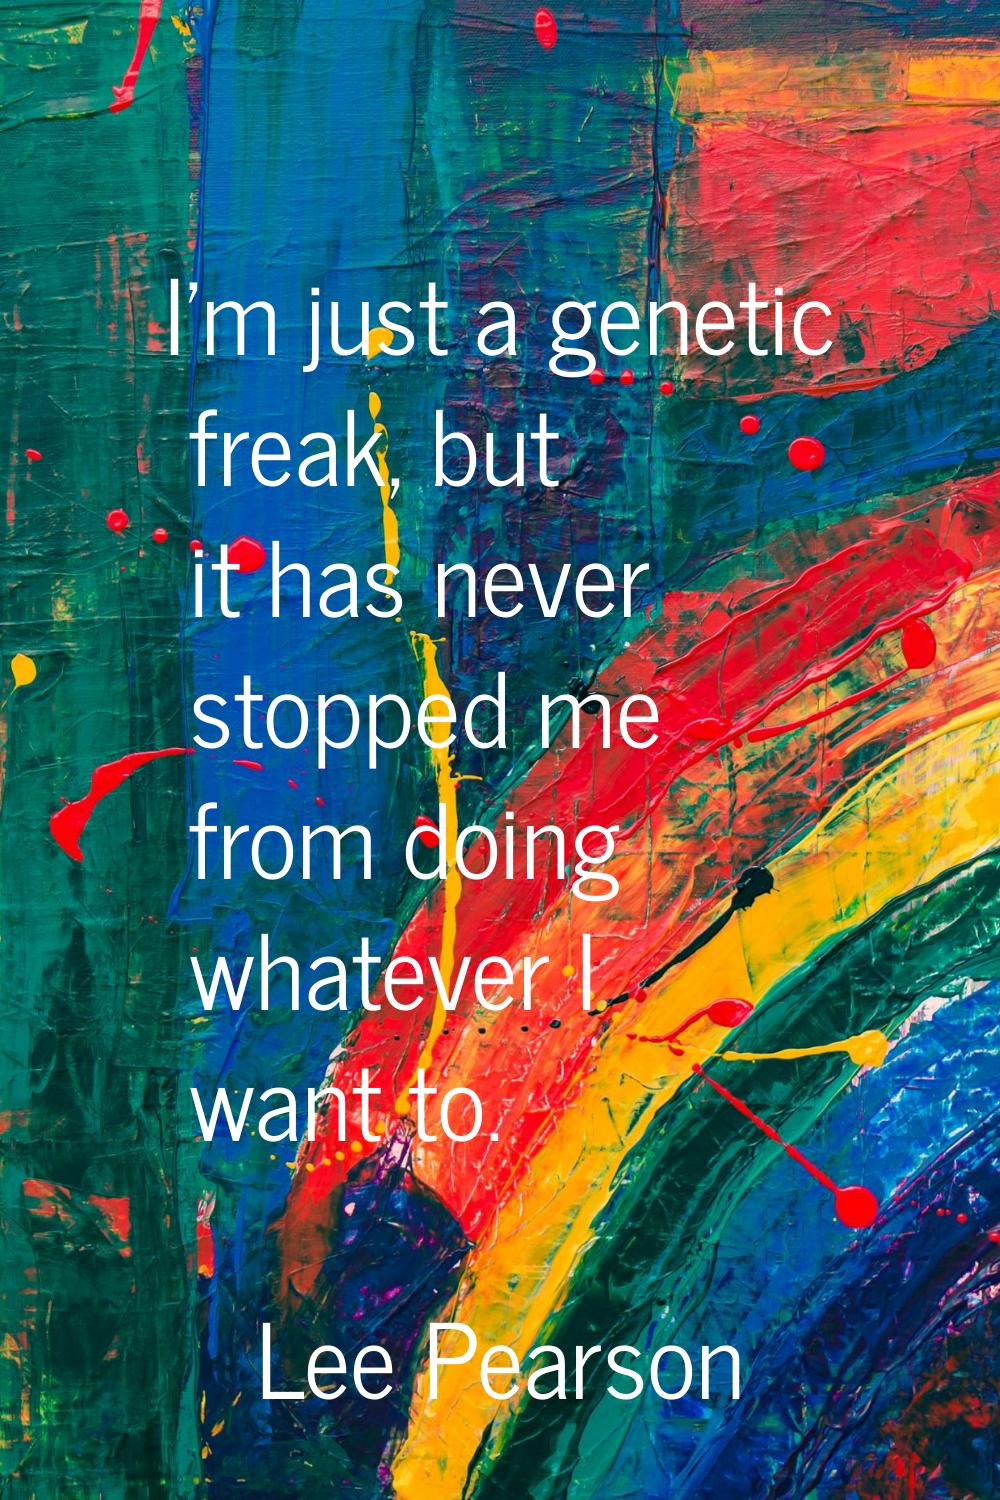 I'm just a genetic freak, but it has never stopped me from doing whatever I want to.